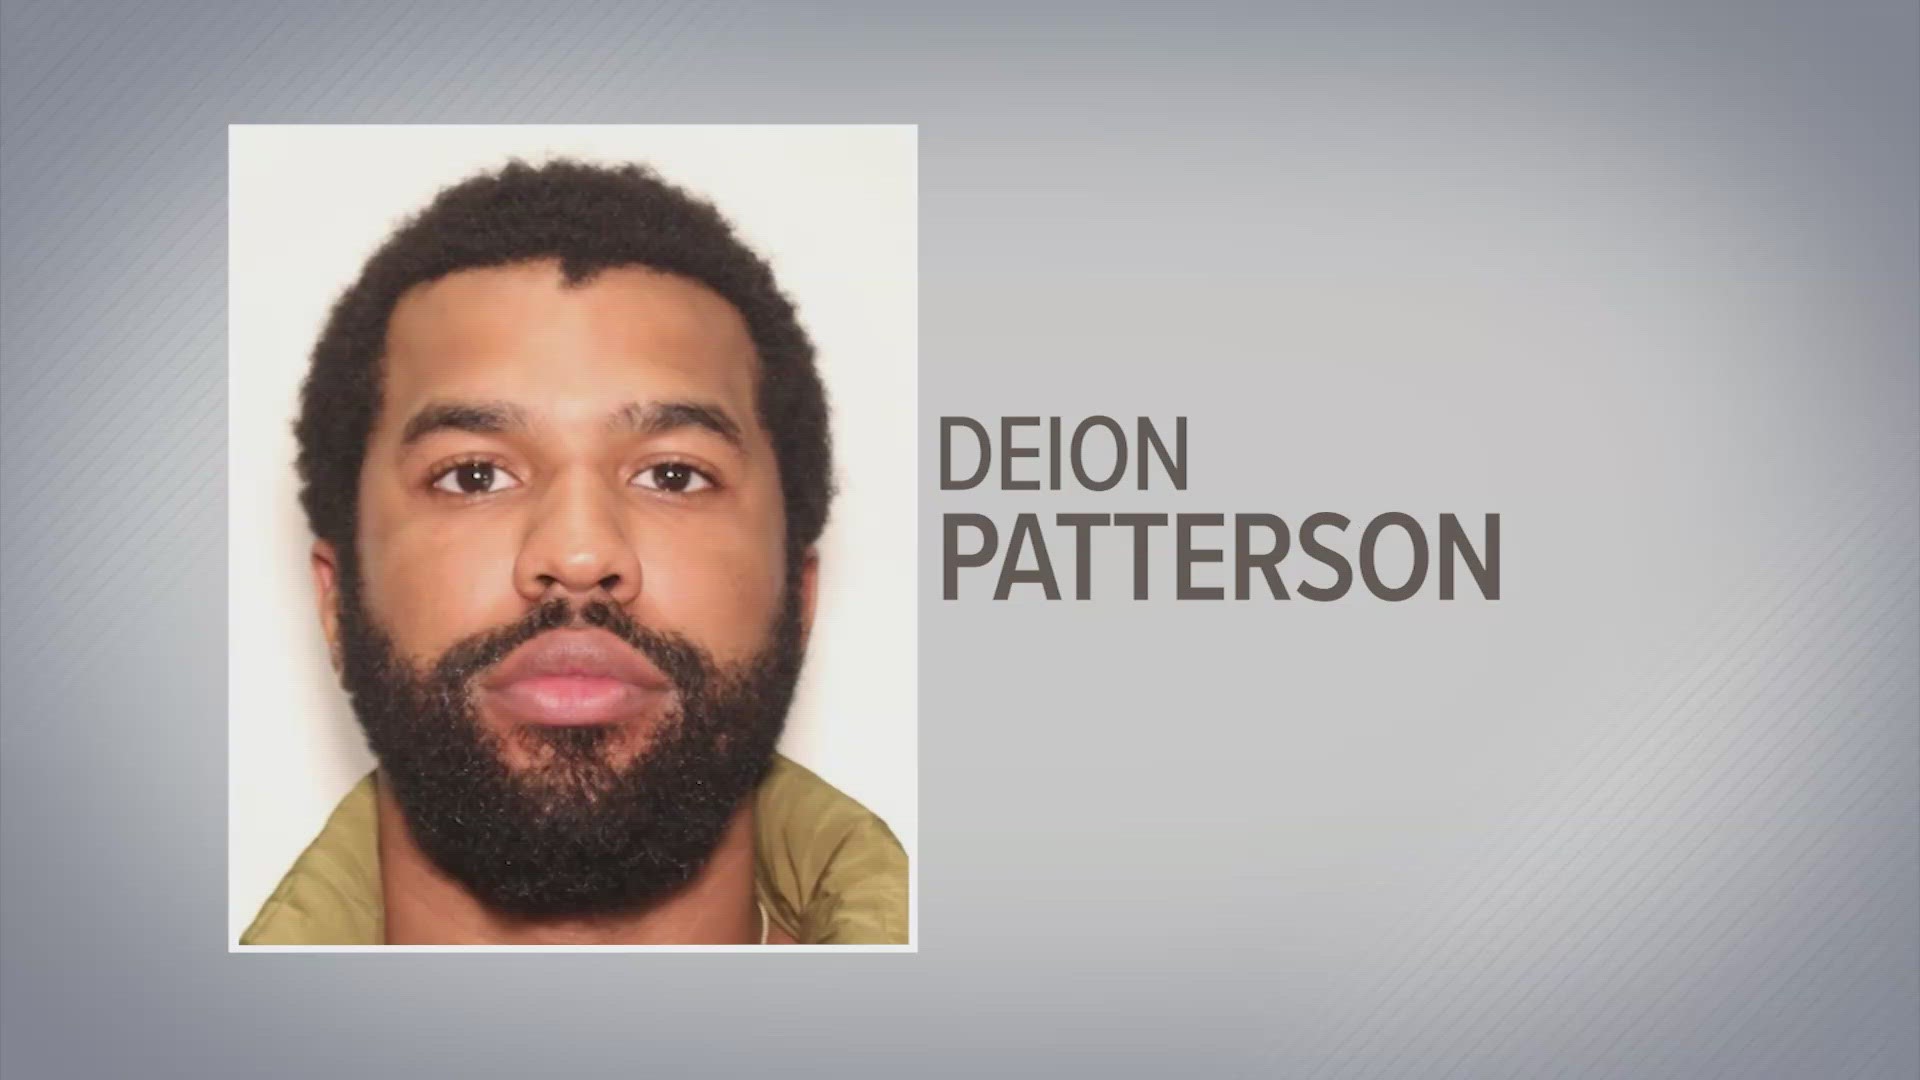 Investigators said 24-year-old Deion Patterson was waiting for an appointment Wednesday morning when he became agitated, pulled out a gun and started shooting.